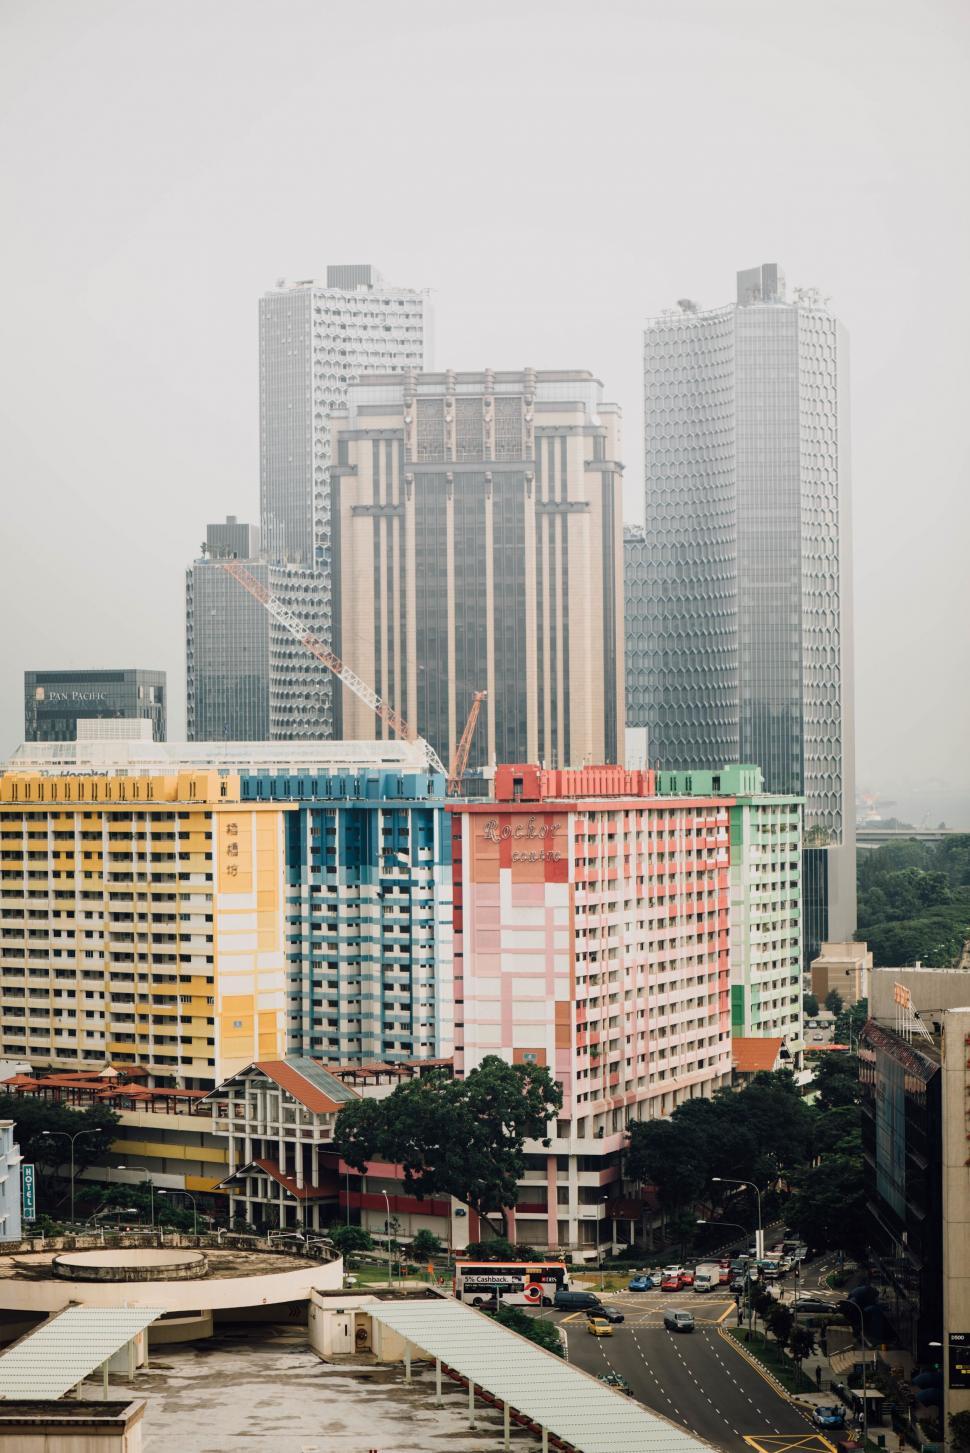 Free Image of Colorful high-rise buildings in a cityscape 